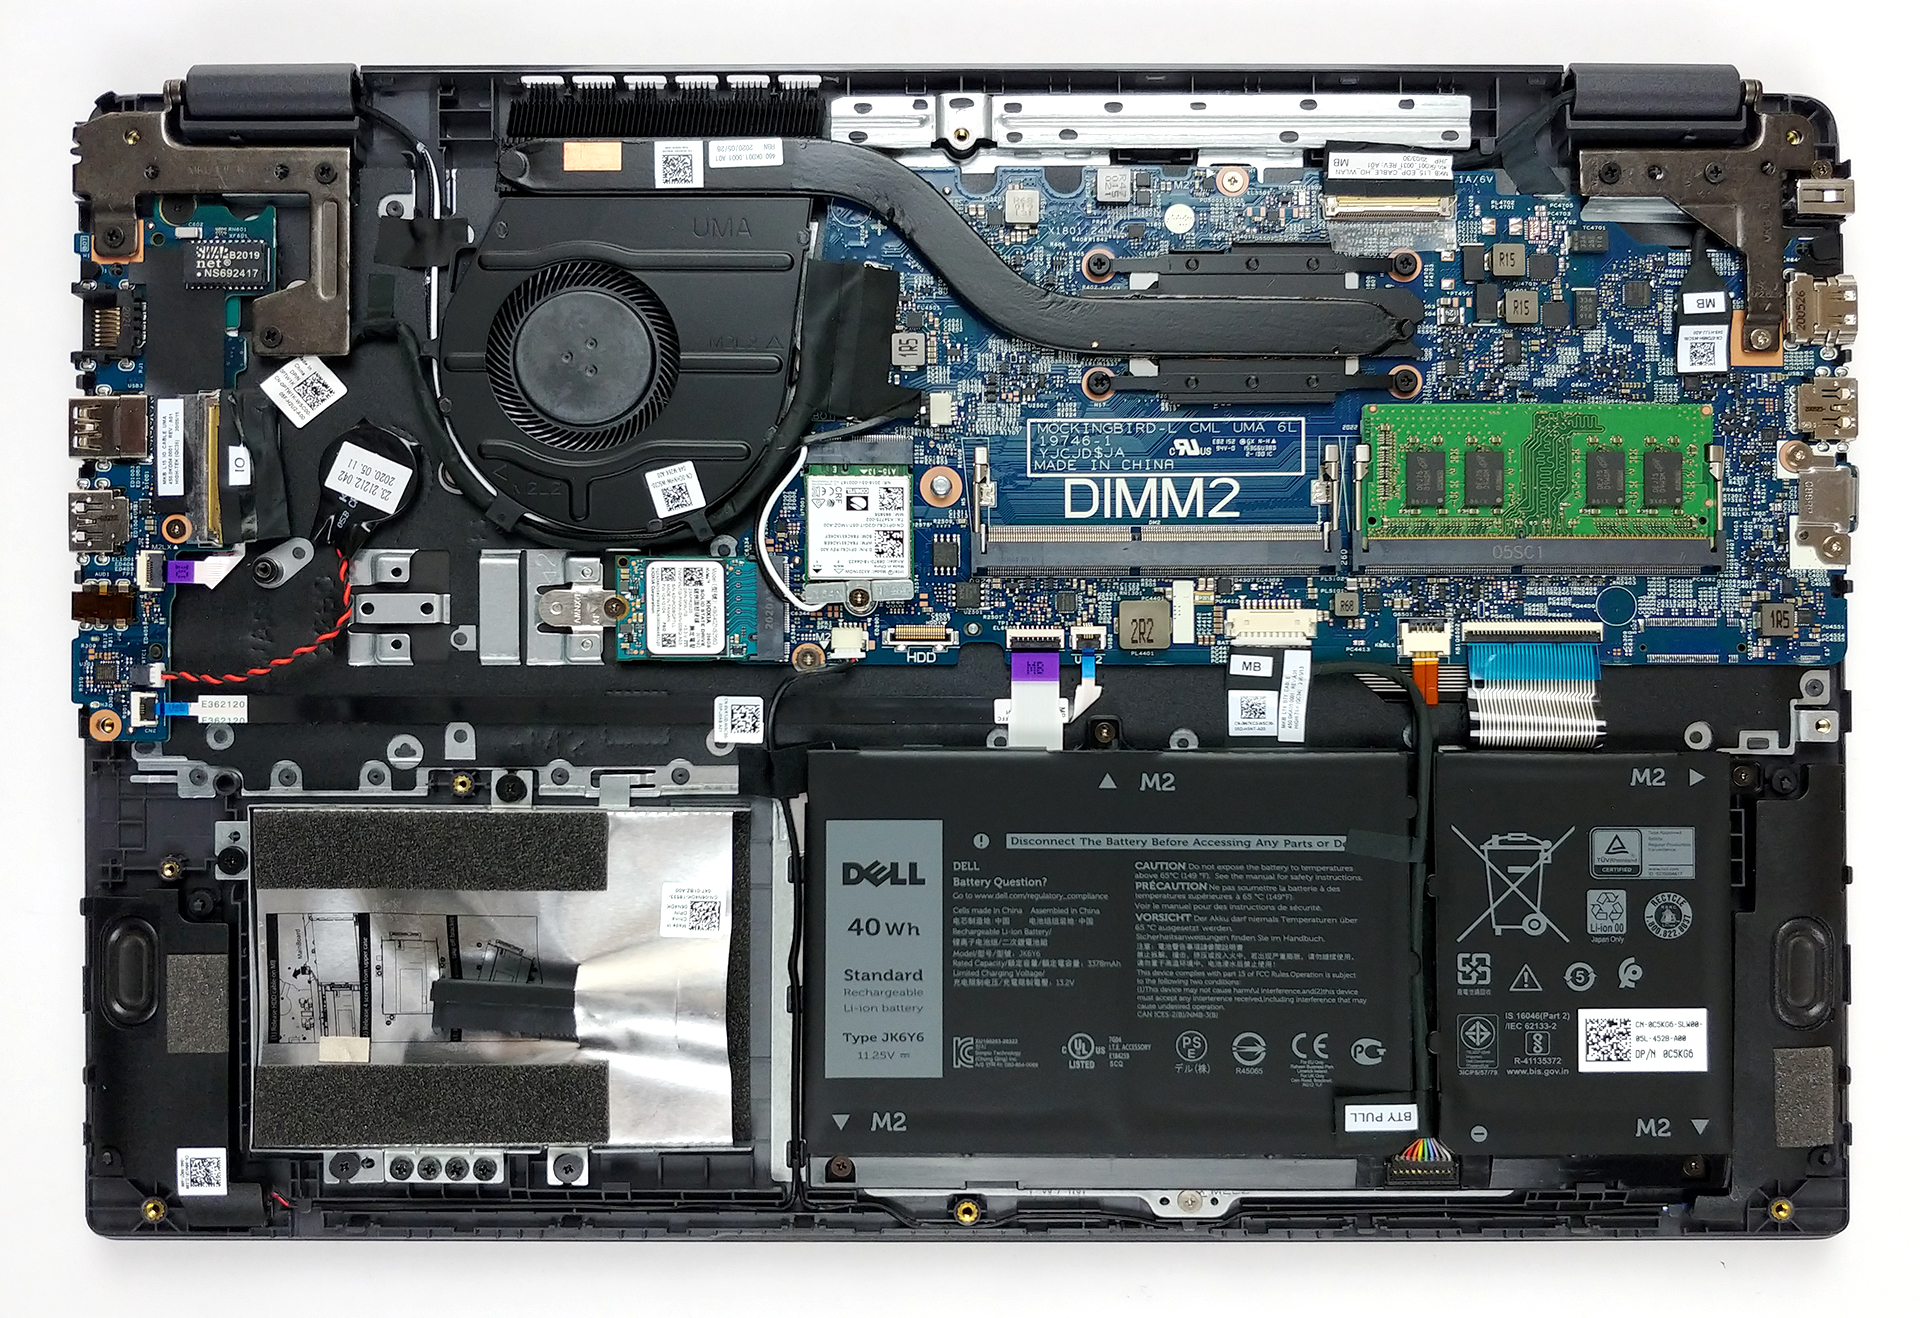 Inside Dell Latitude 15 3510 - disassembly and upgrade options |  